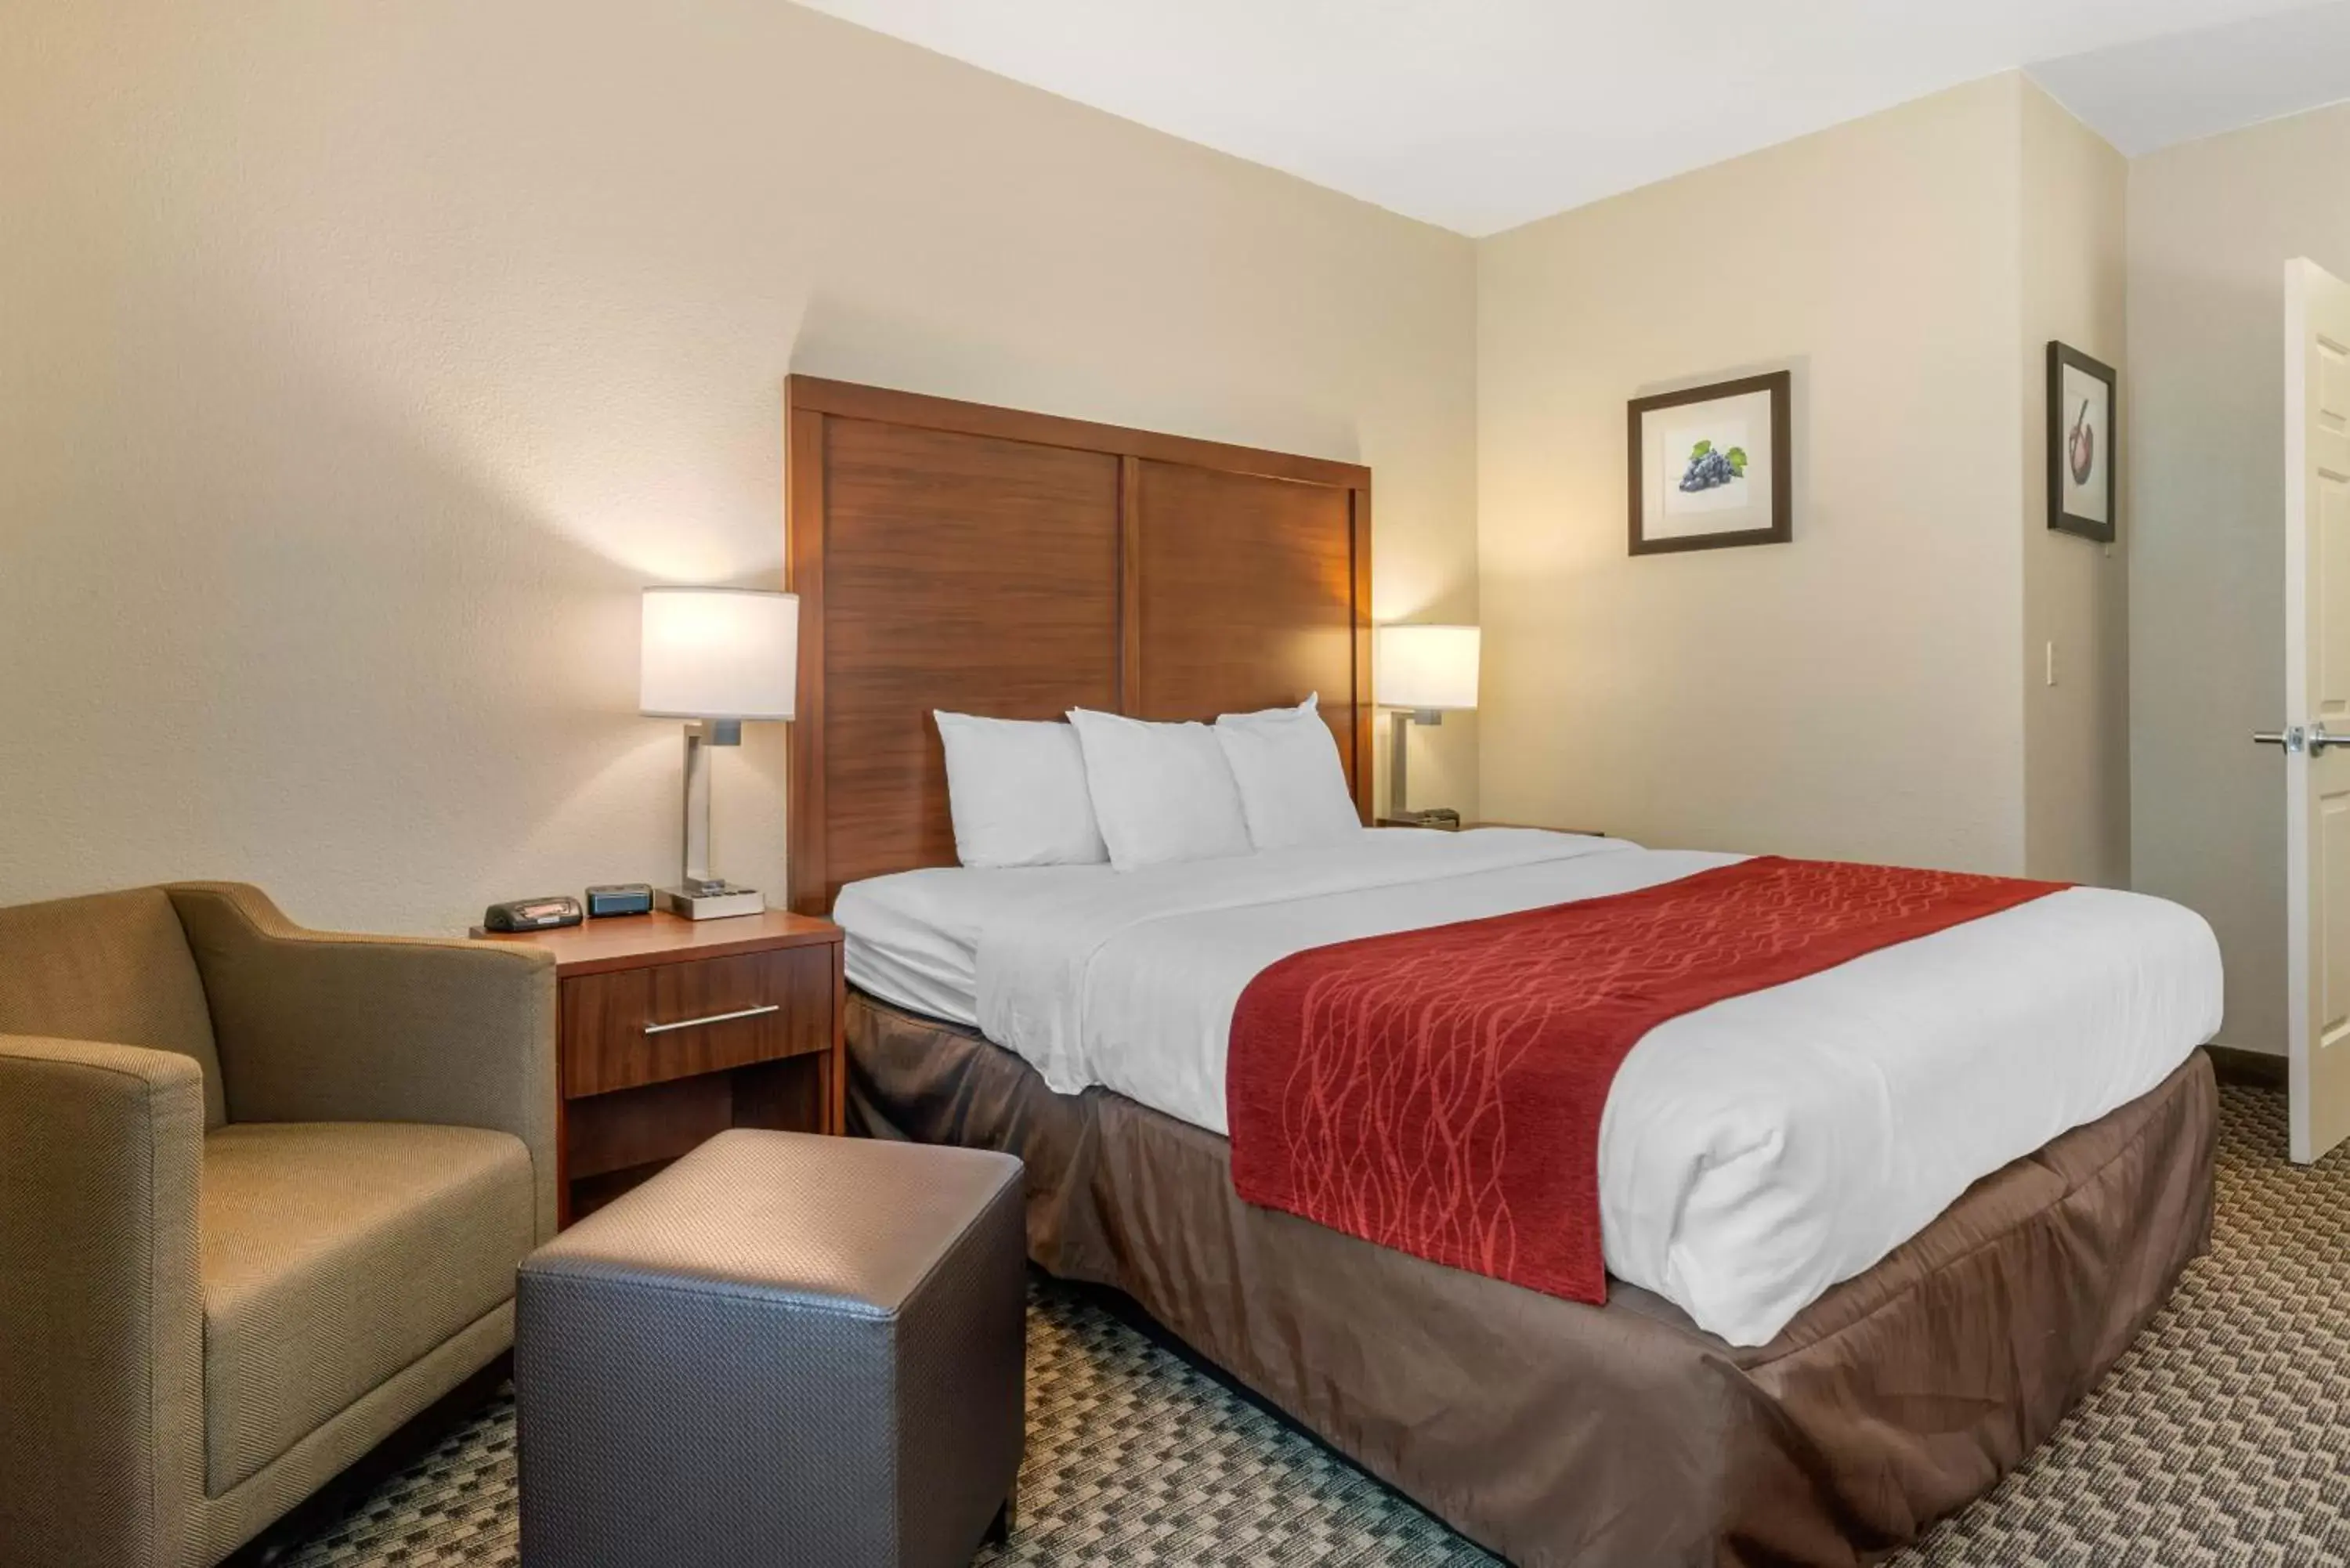 King Room (2 Adults) - Non-Smoking in Comfort Inn & Suites Galt – Lodi North